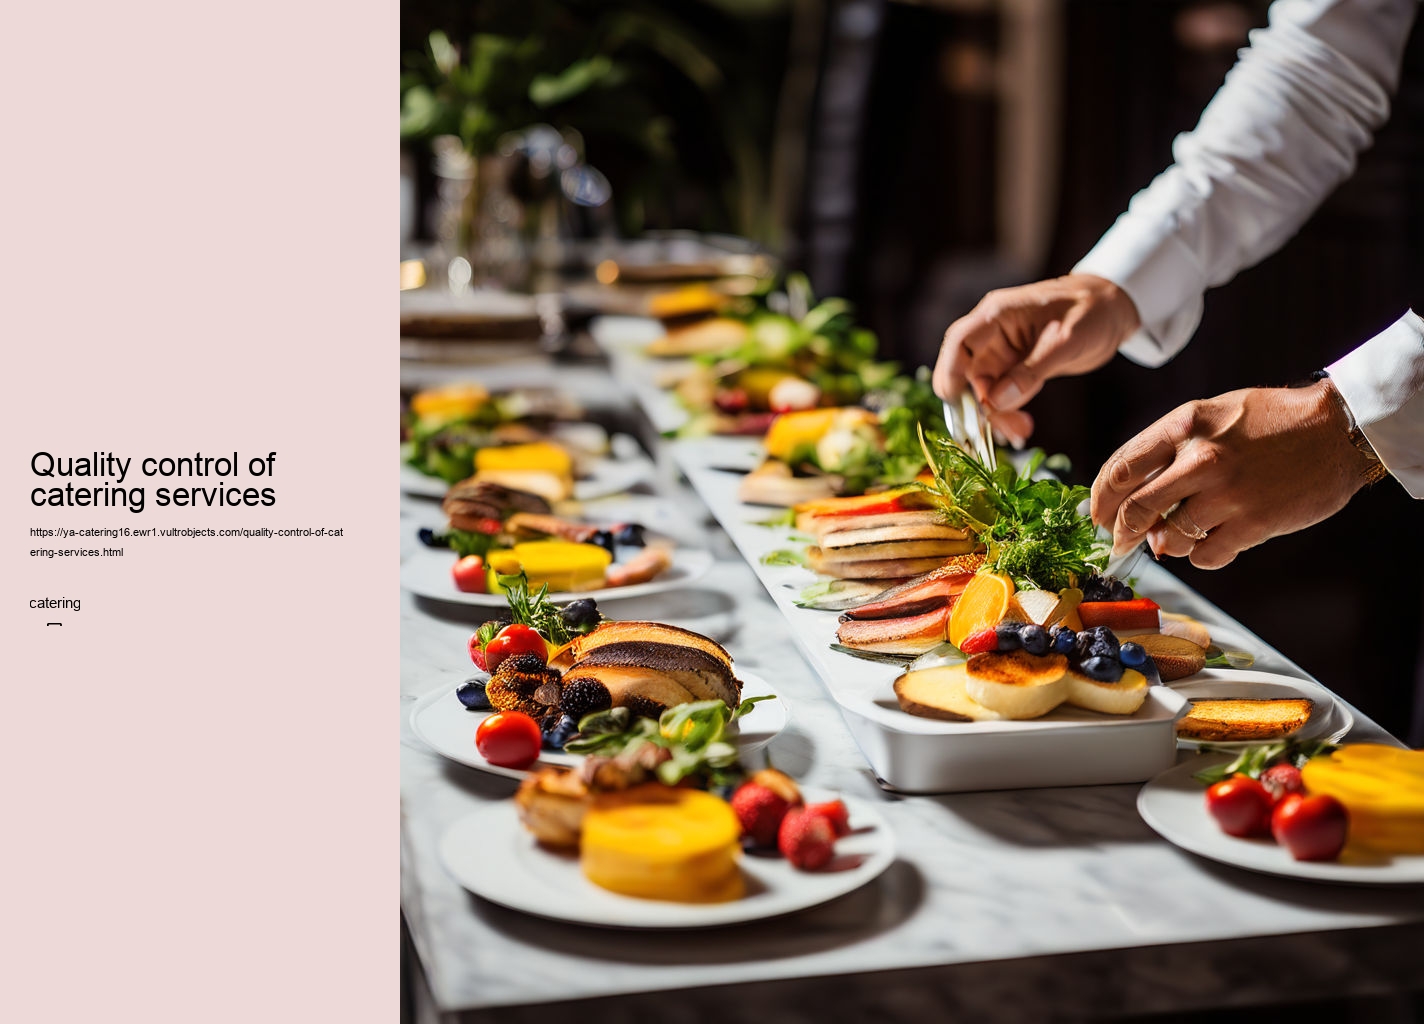 Quality control of catering services